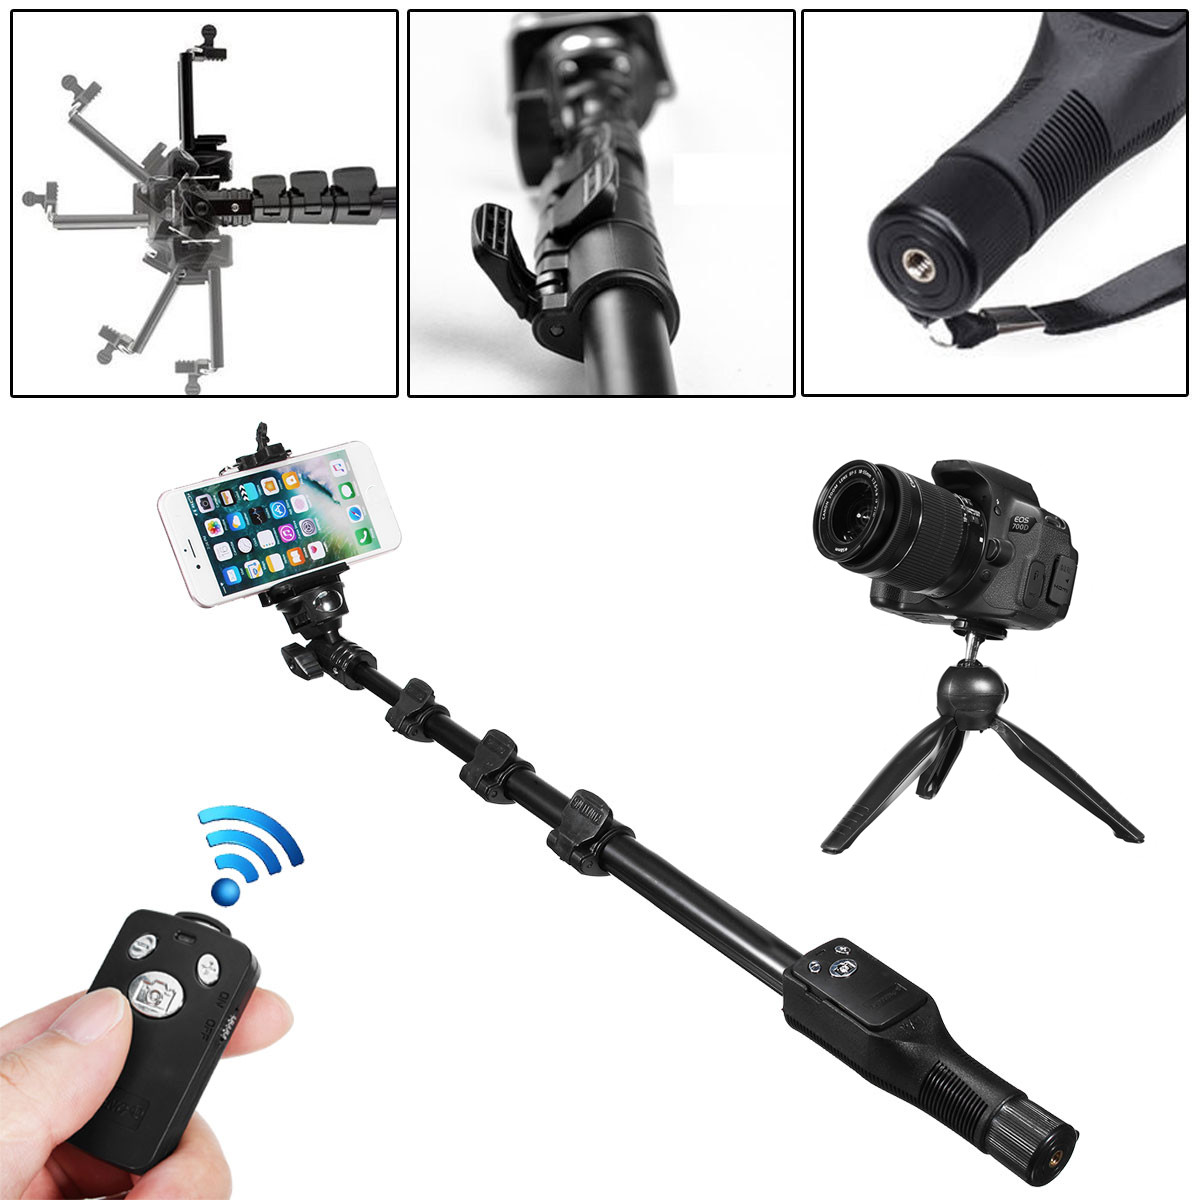 bluetooth-Wireless-Remote-Control-Extendable-Handheld-Selfie-Stick-Monopod--Tripod-for-Camera-Mobile-1340611-6